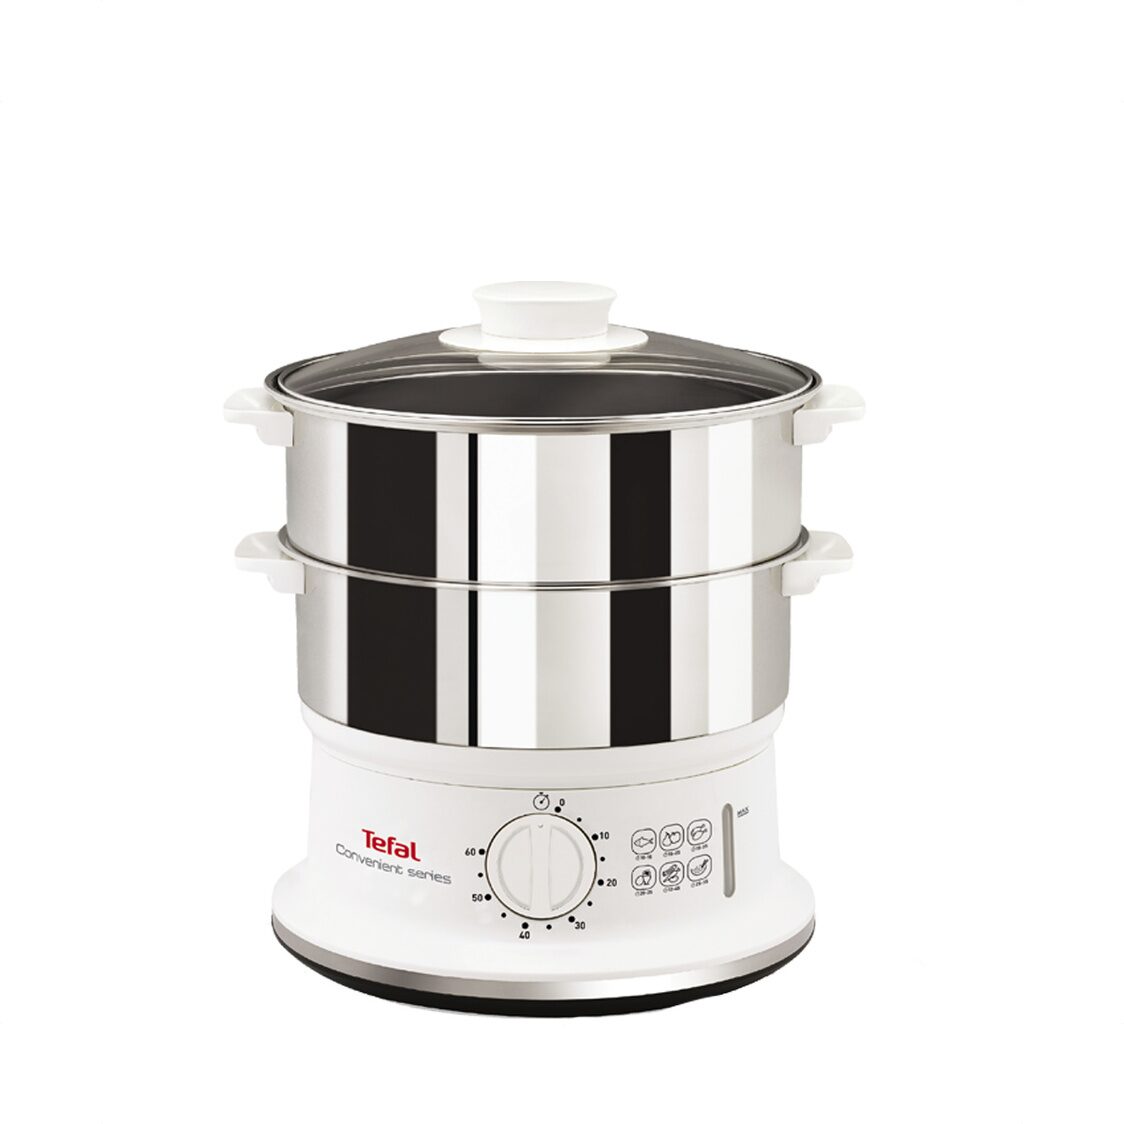 Tefal Stainless Steel Convenient Steamer